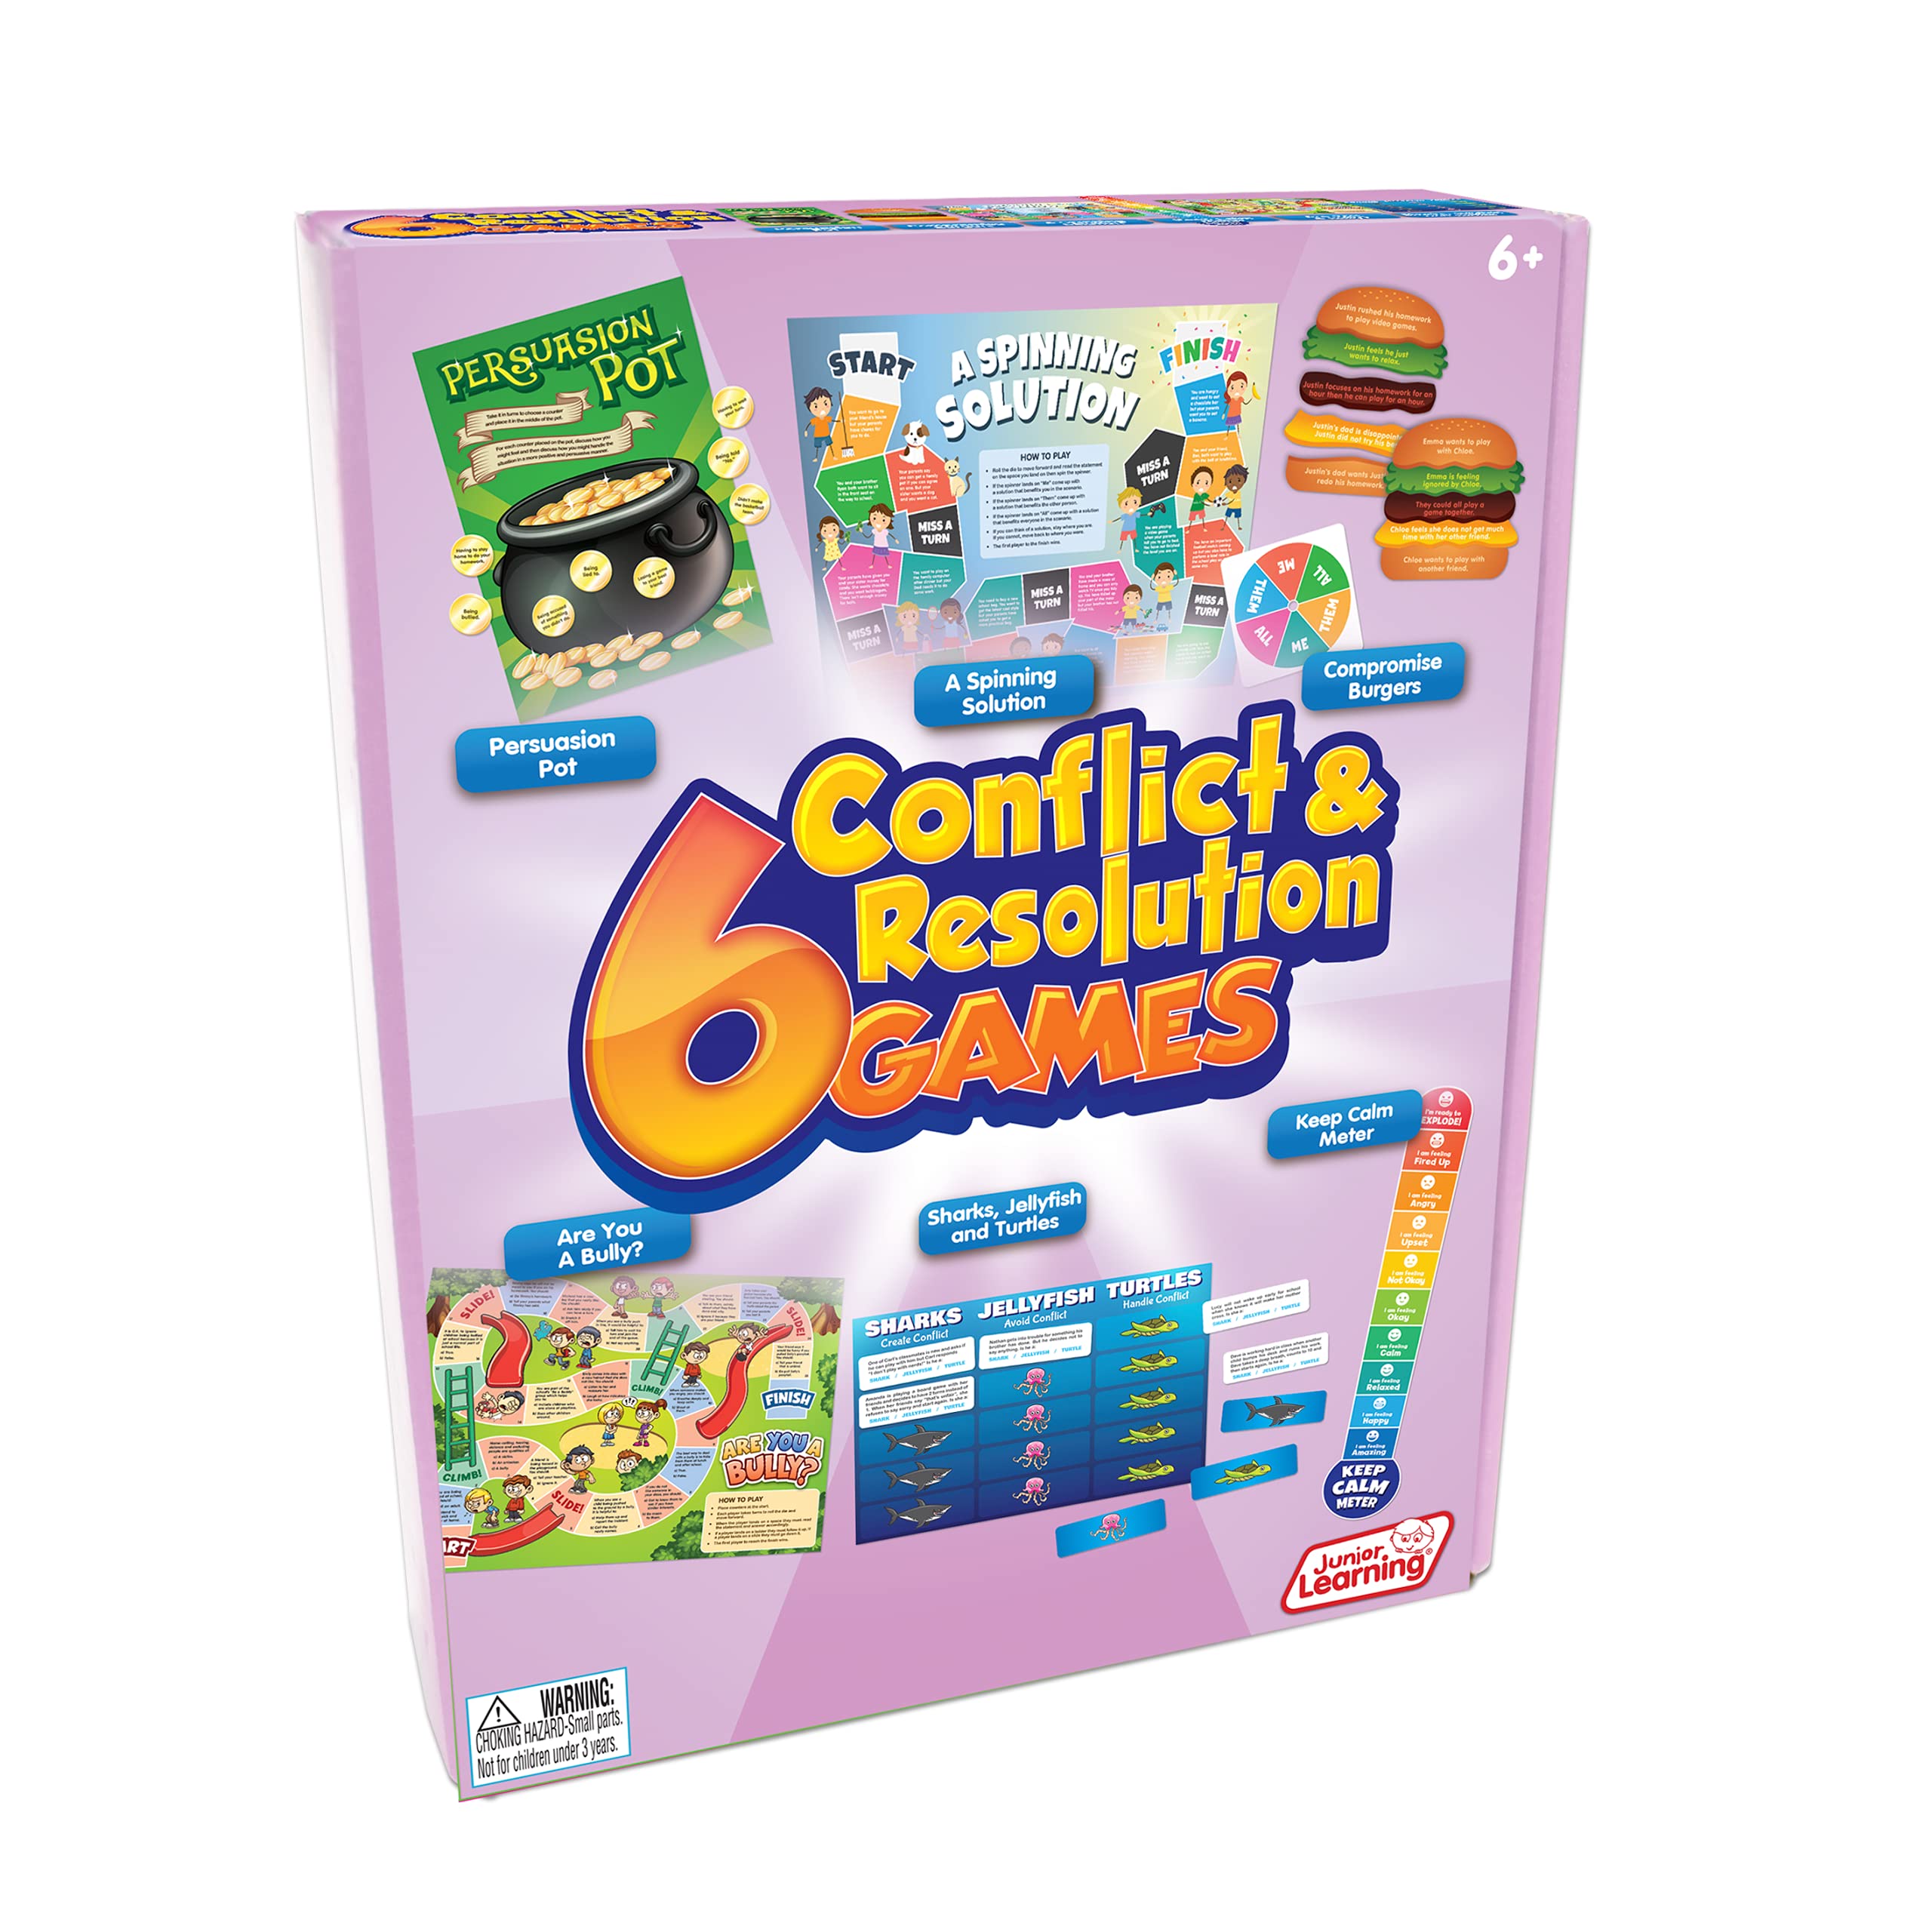 6 Conflict & Resolution Games by Junior Learning